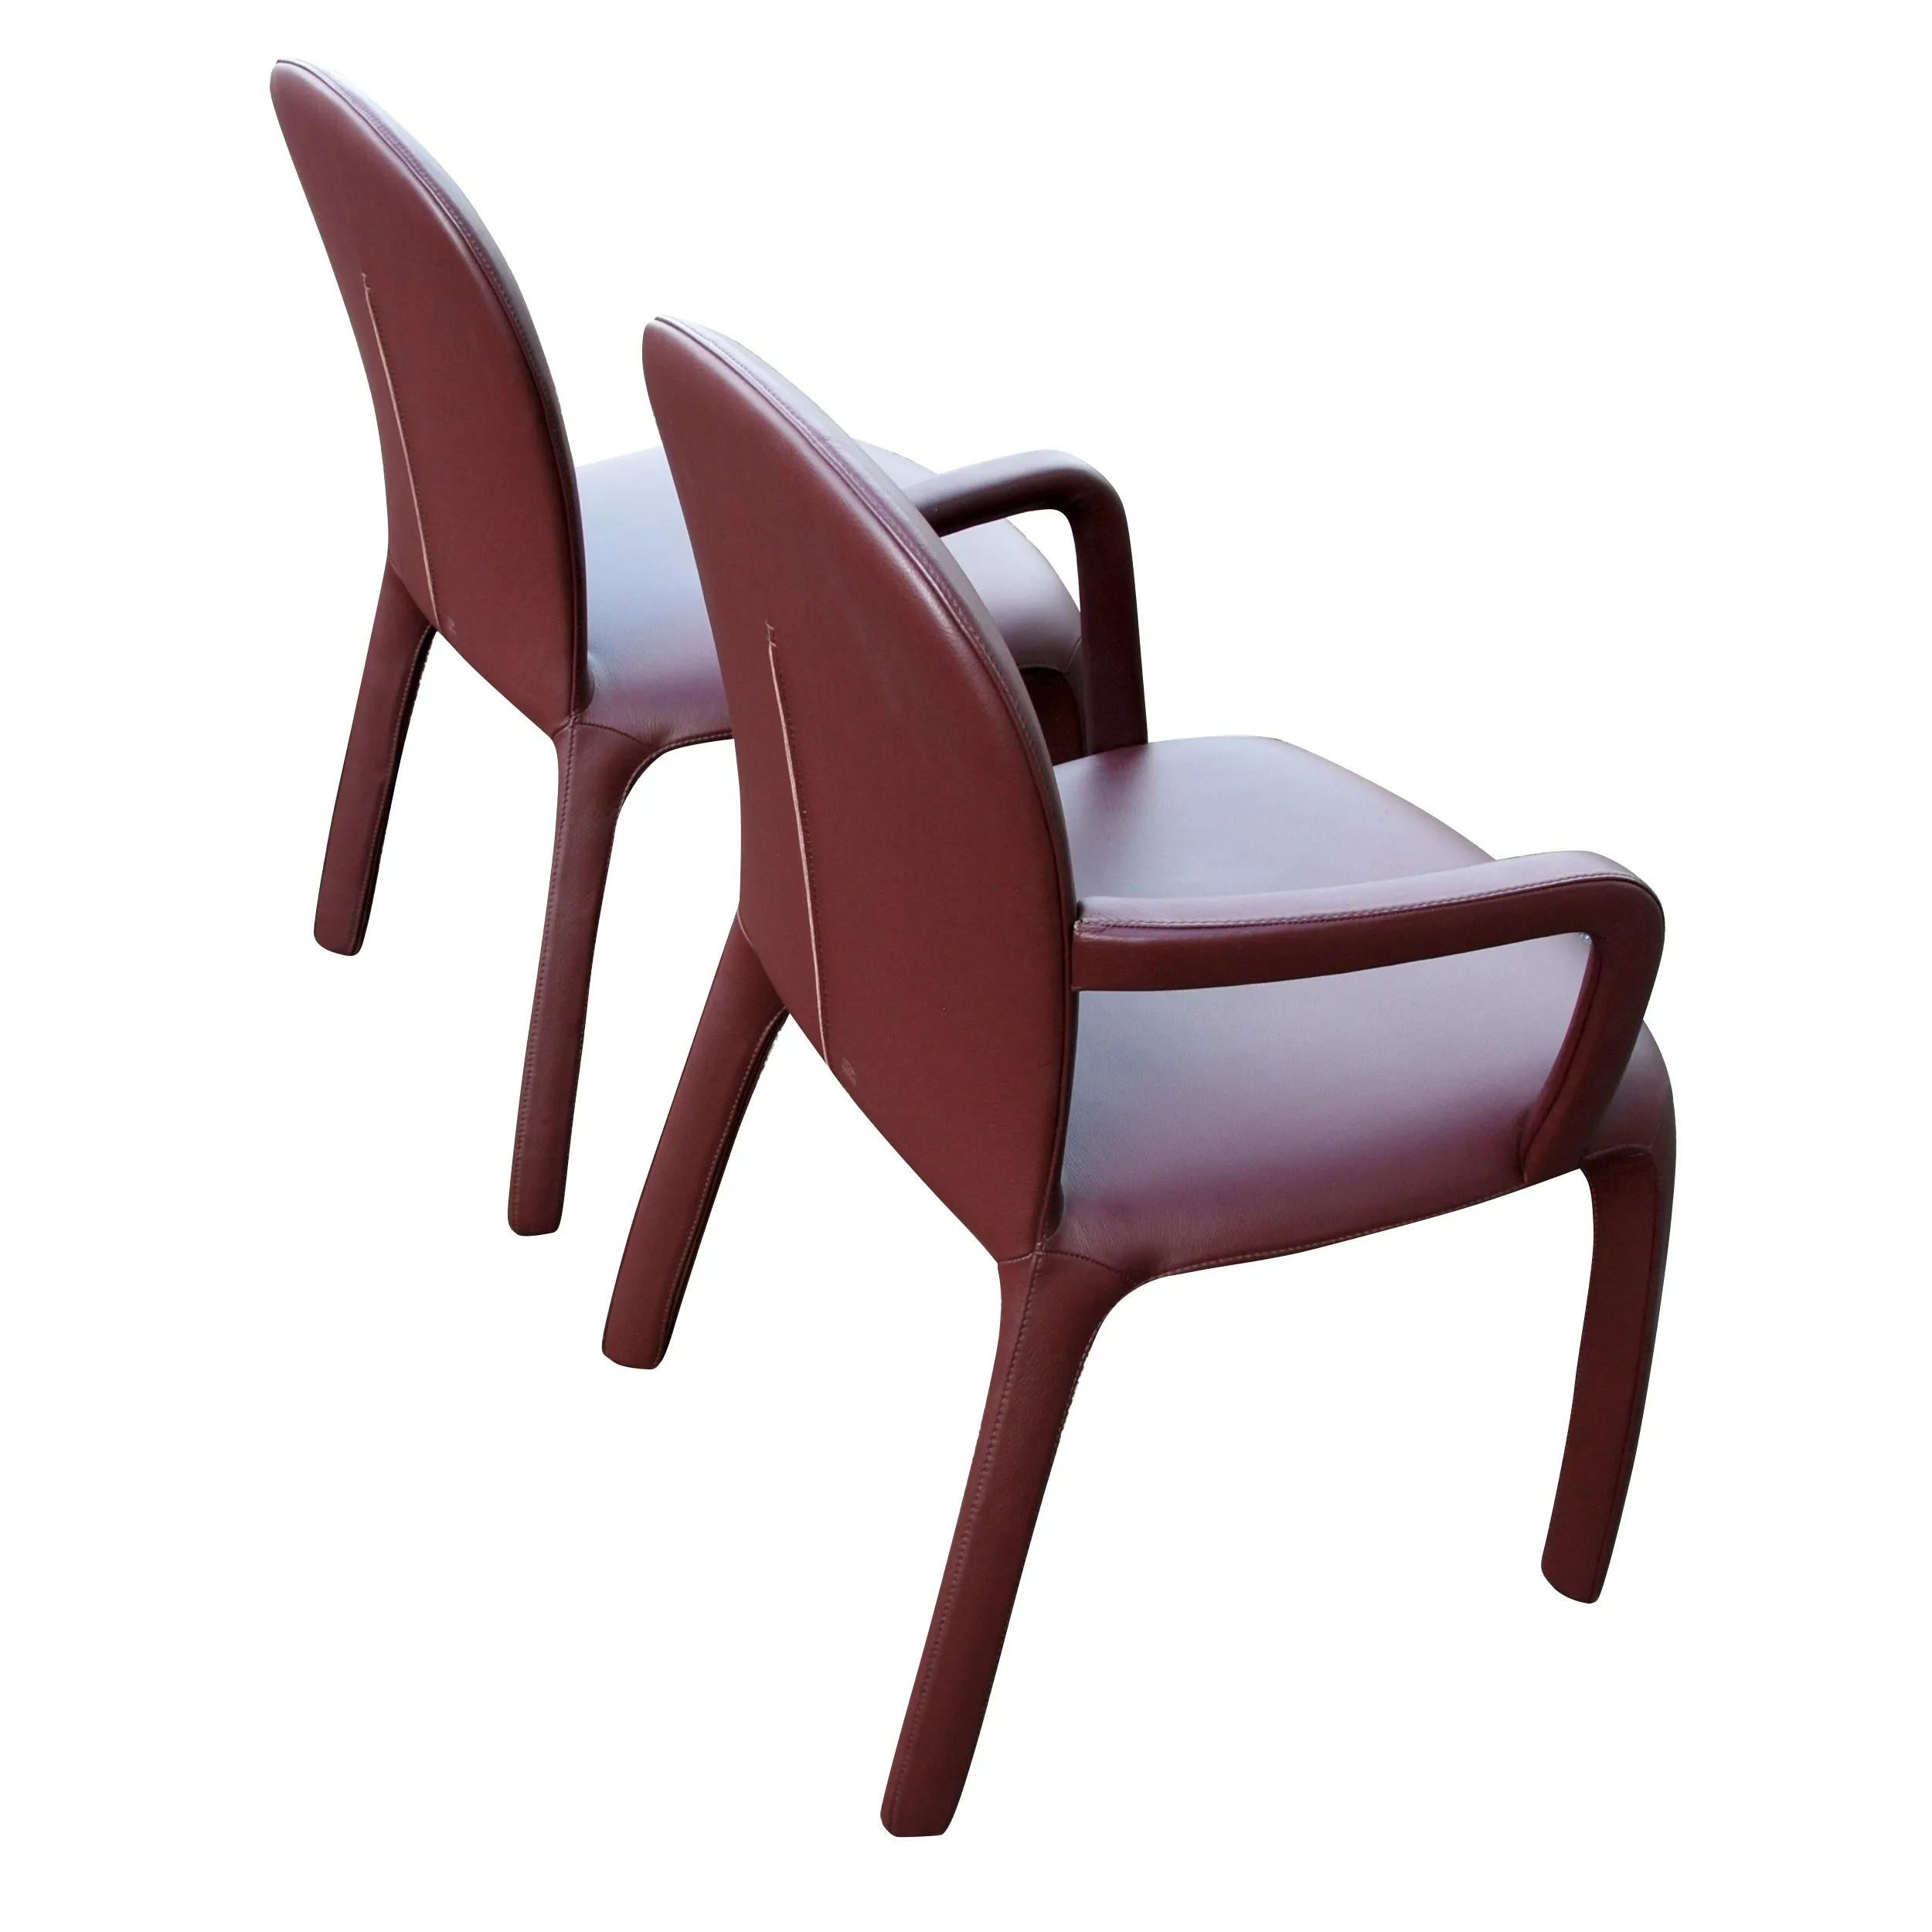 Set of 6 “Amelie” Dining Chairs by Claudio Bellini for Poltrona Frau In Good Condition For Sale In Pasadena, TX